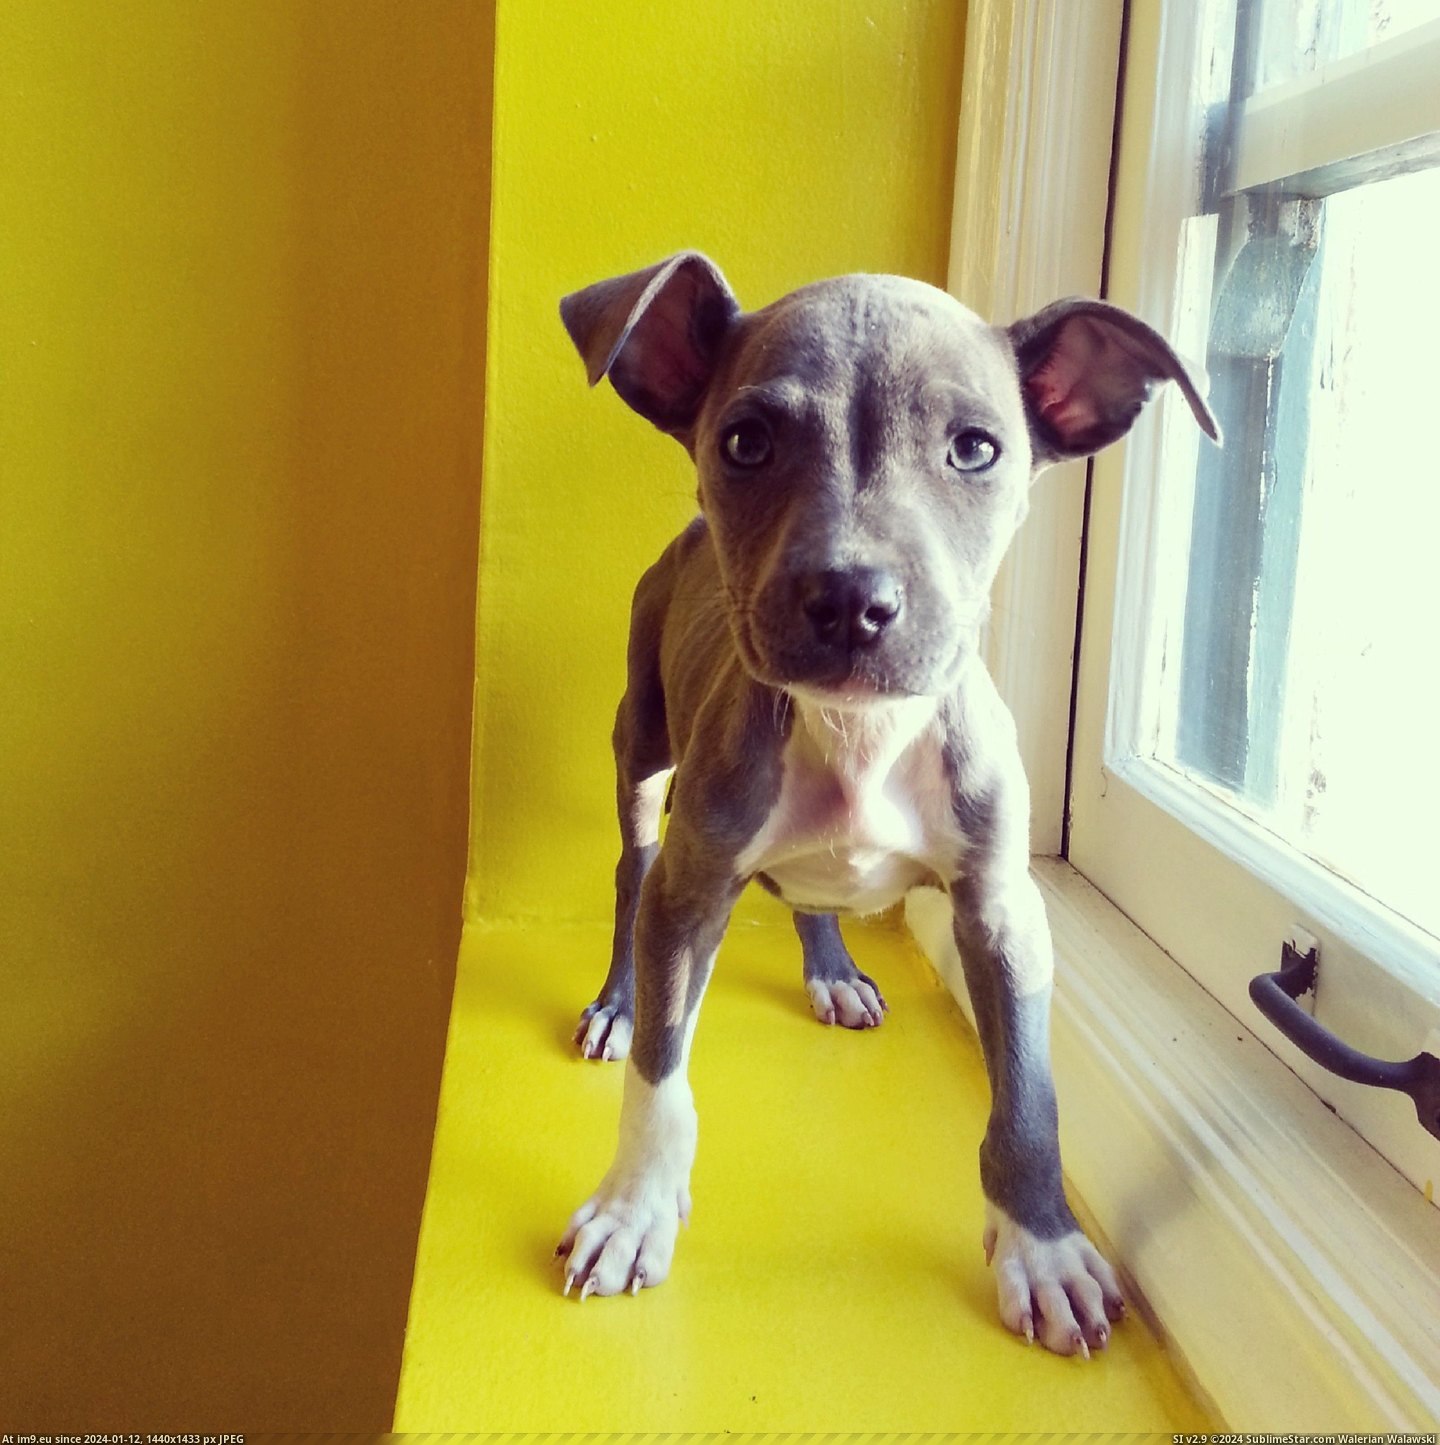 #Love #Was #Tiny #Mexico #Pit #Luna #Malnourished #She #Meet #Brought [Aww] She was malnourished and in need of love at the U.S.-Mexico border, so I brought her home. Meet my tiny pit, Luna. Pic. (Изображение из альбом My r/AWW favs))